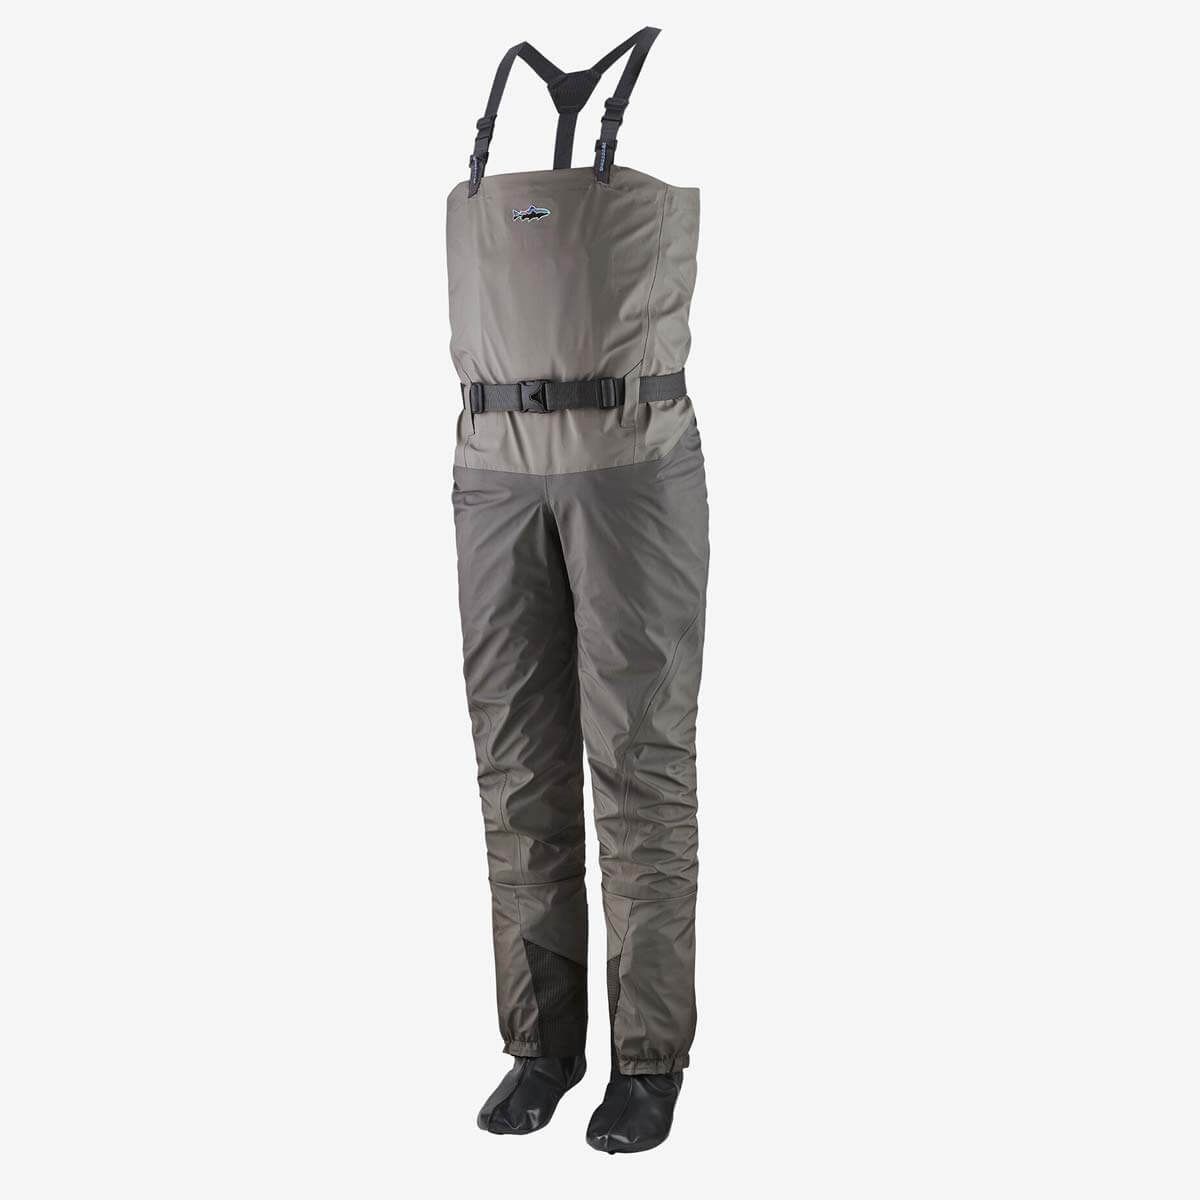 Patagonia Swiftcurrent Ultralight Waders - XLL (XL Long 12-14)